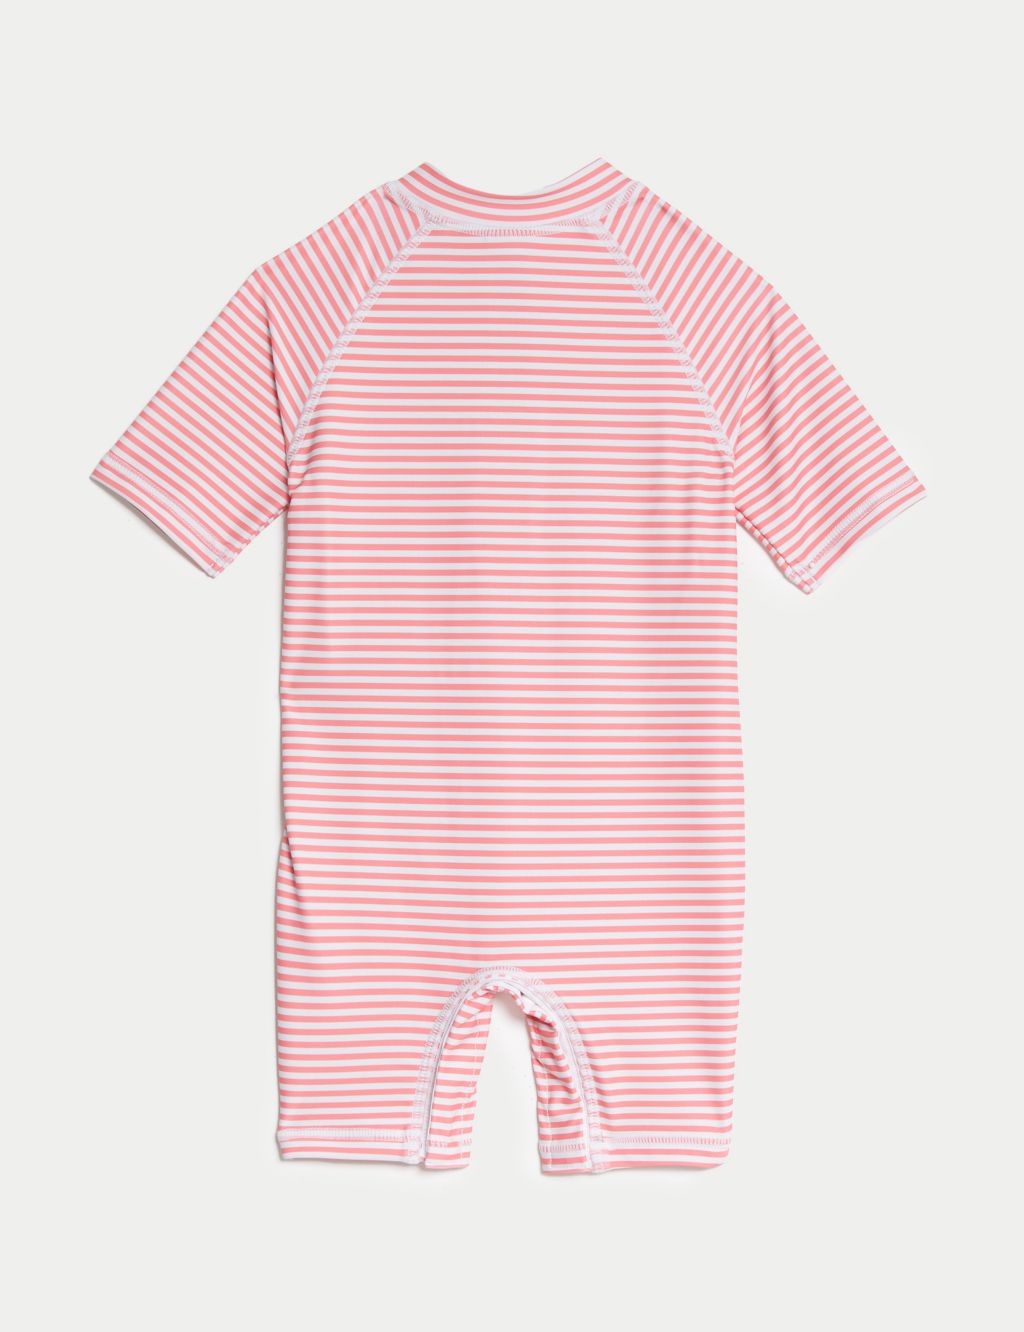 Striped Zip Swimsuit (0-3 Yrs) image 2